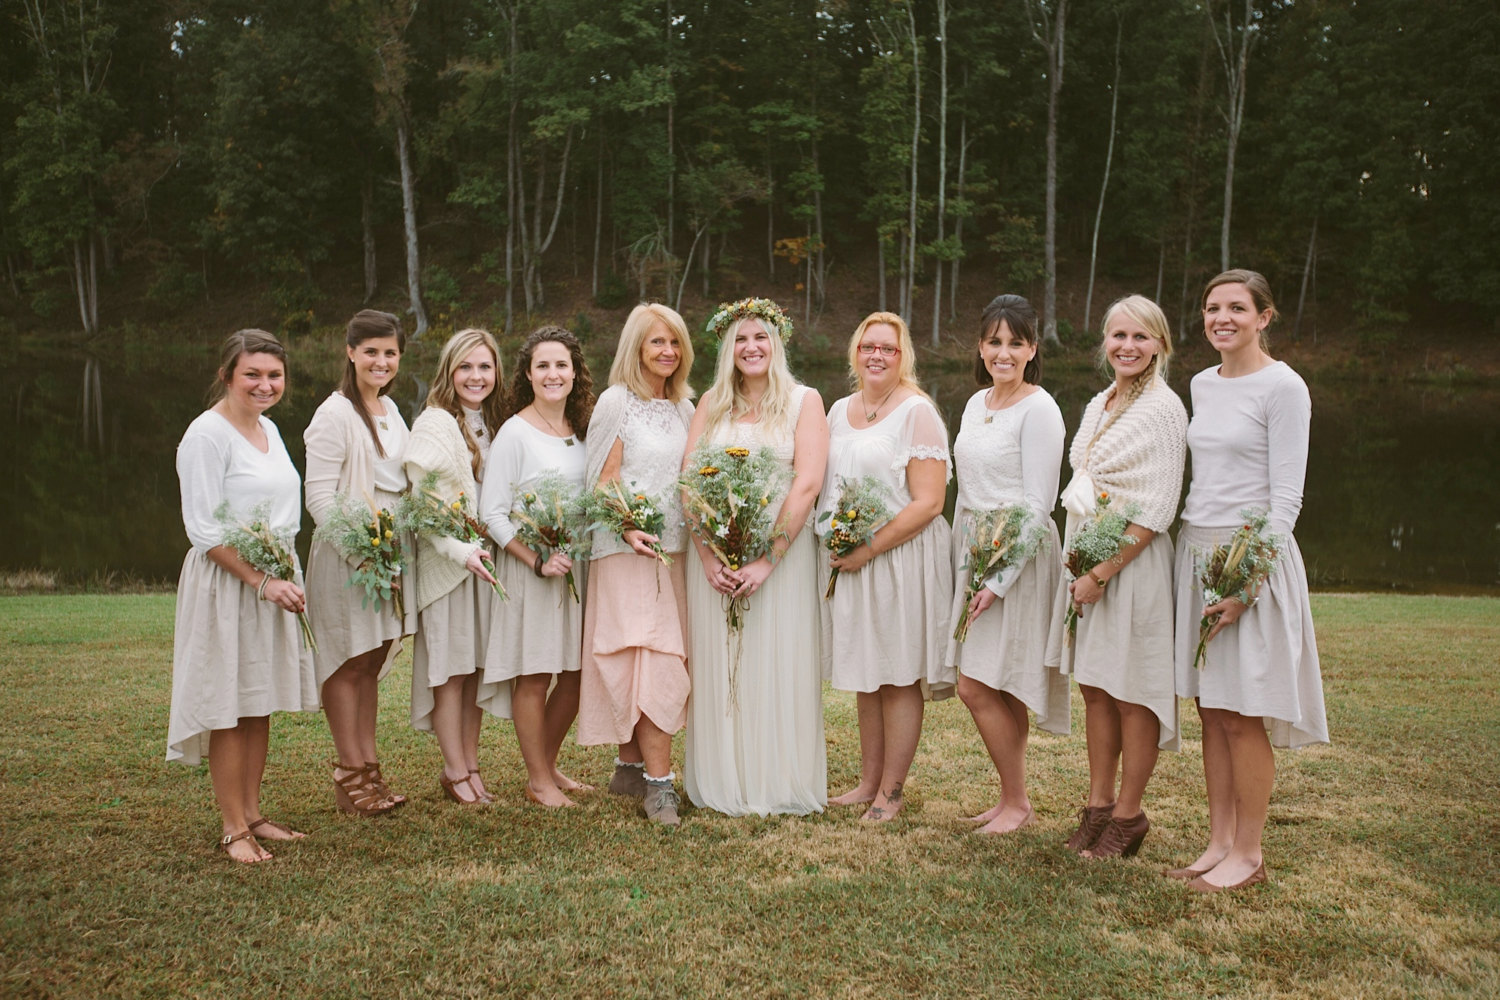 These bridesmaid skirts feature a hi low hem and are available in a variety of colors. | https://emmalinebride.com/bridesmaids/bridesmaid-skirts-hi-low-hem/